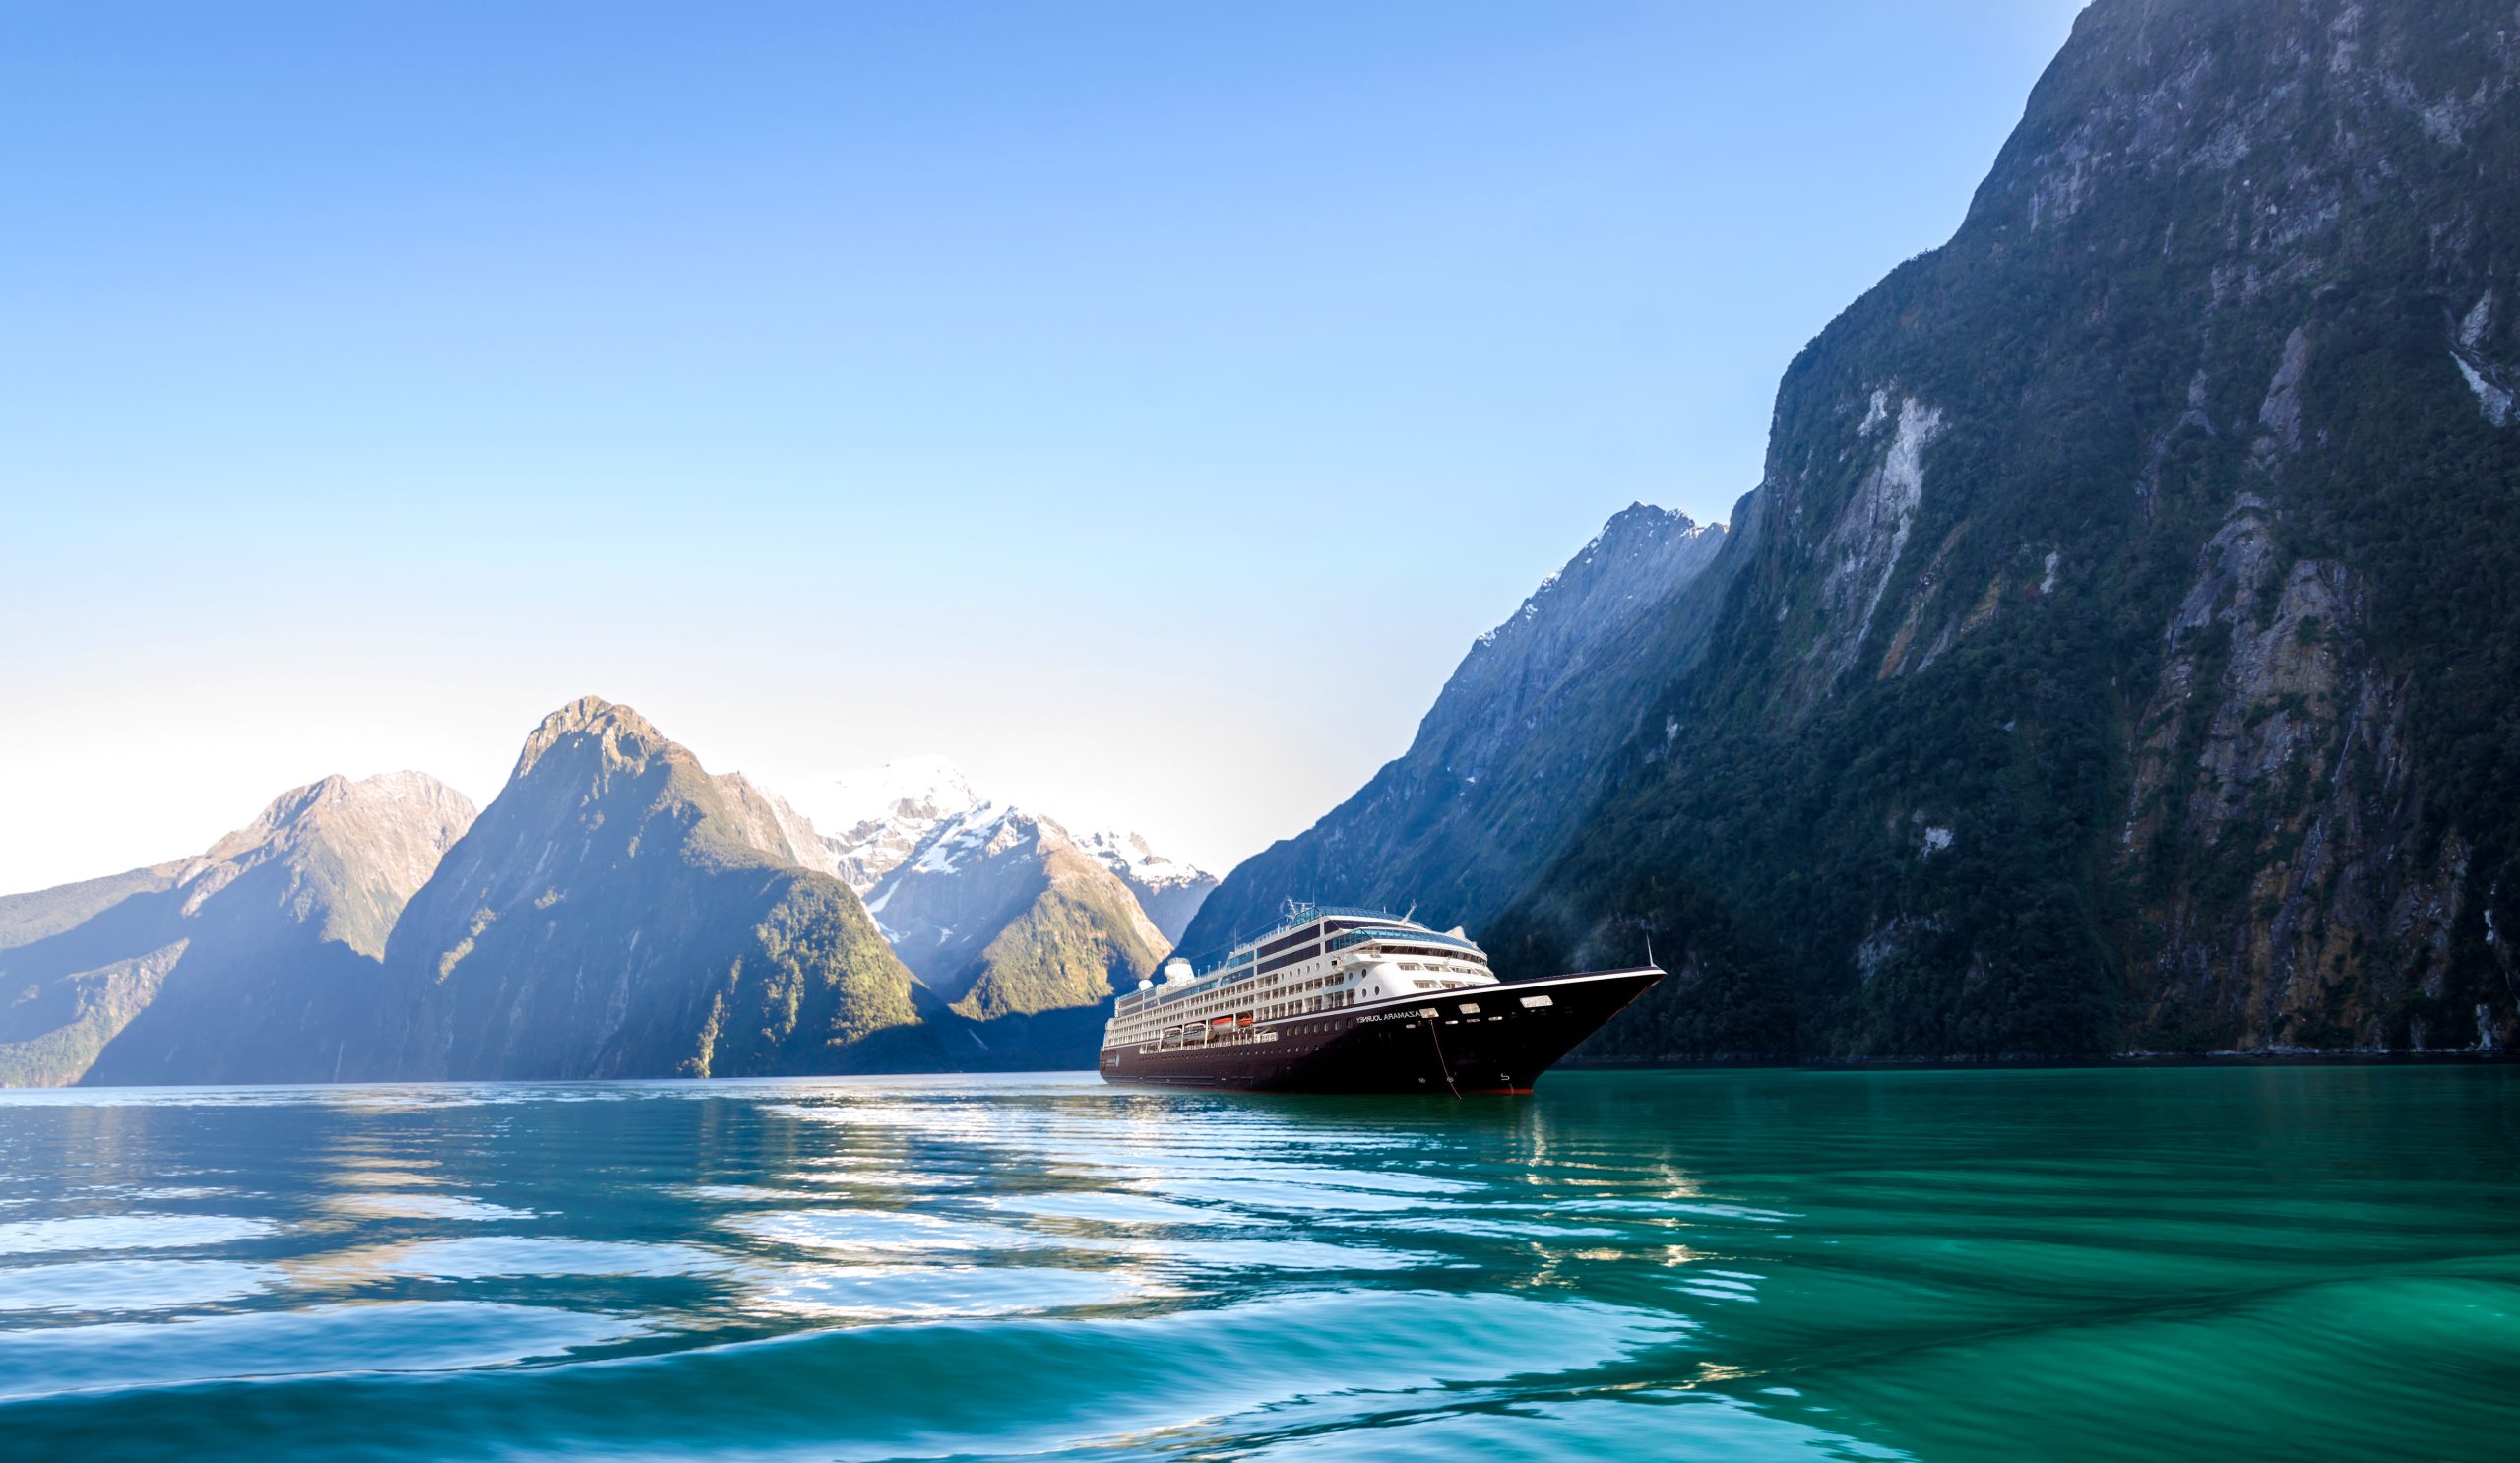 Cruise to New Zealand for 16 nights with free flights and hotel from $272 per person per night